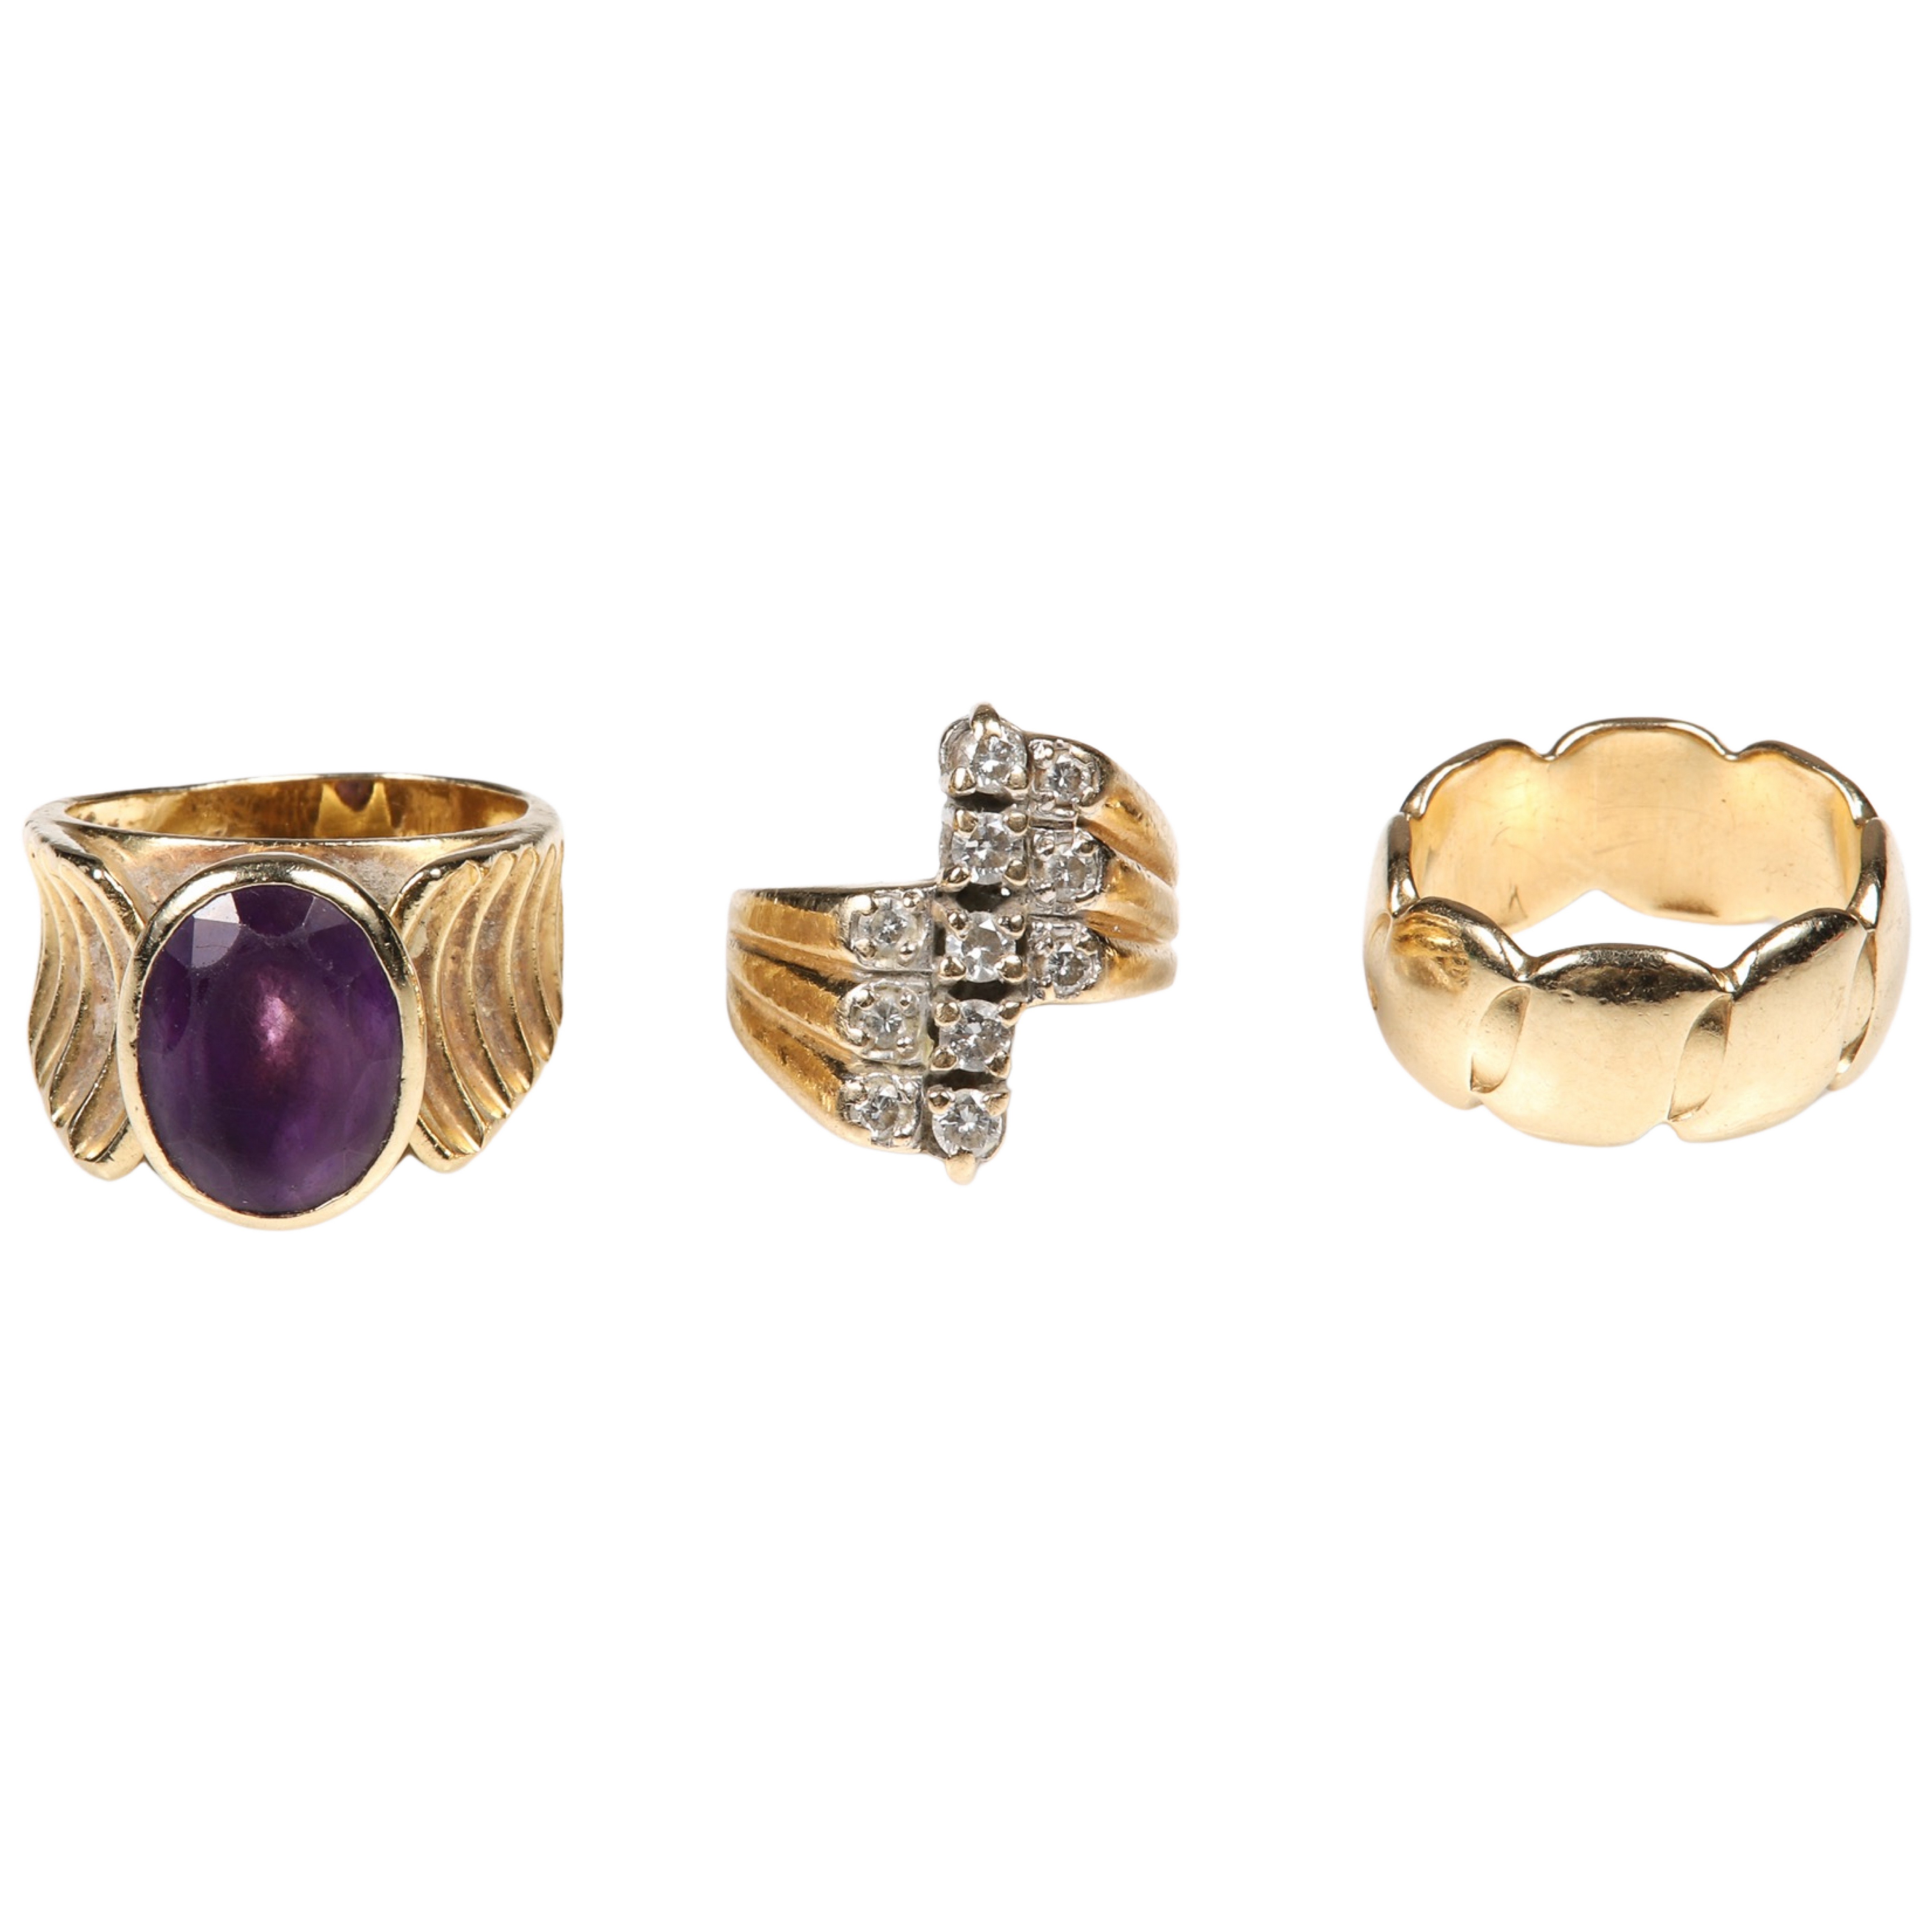 (3) 14K Yellow gold rings to include